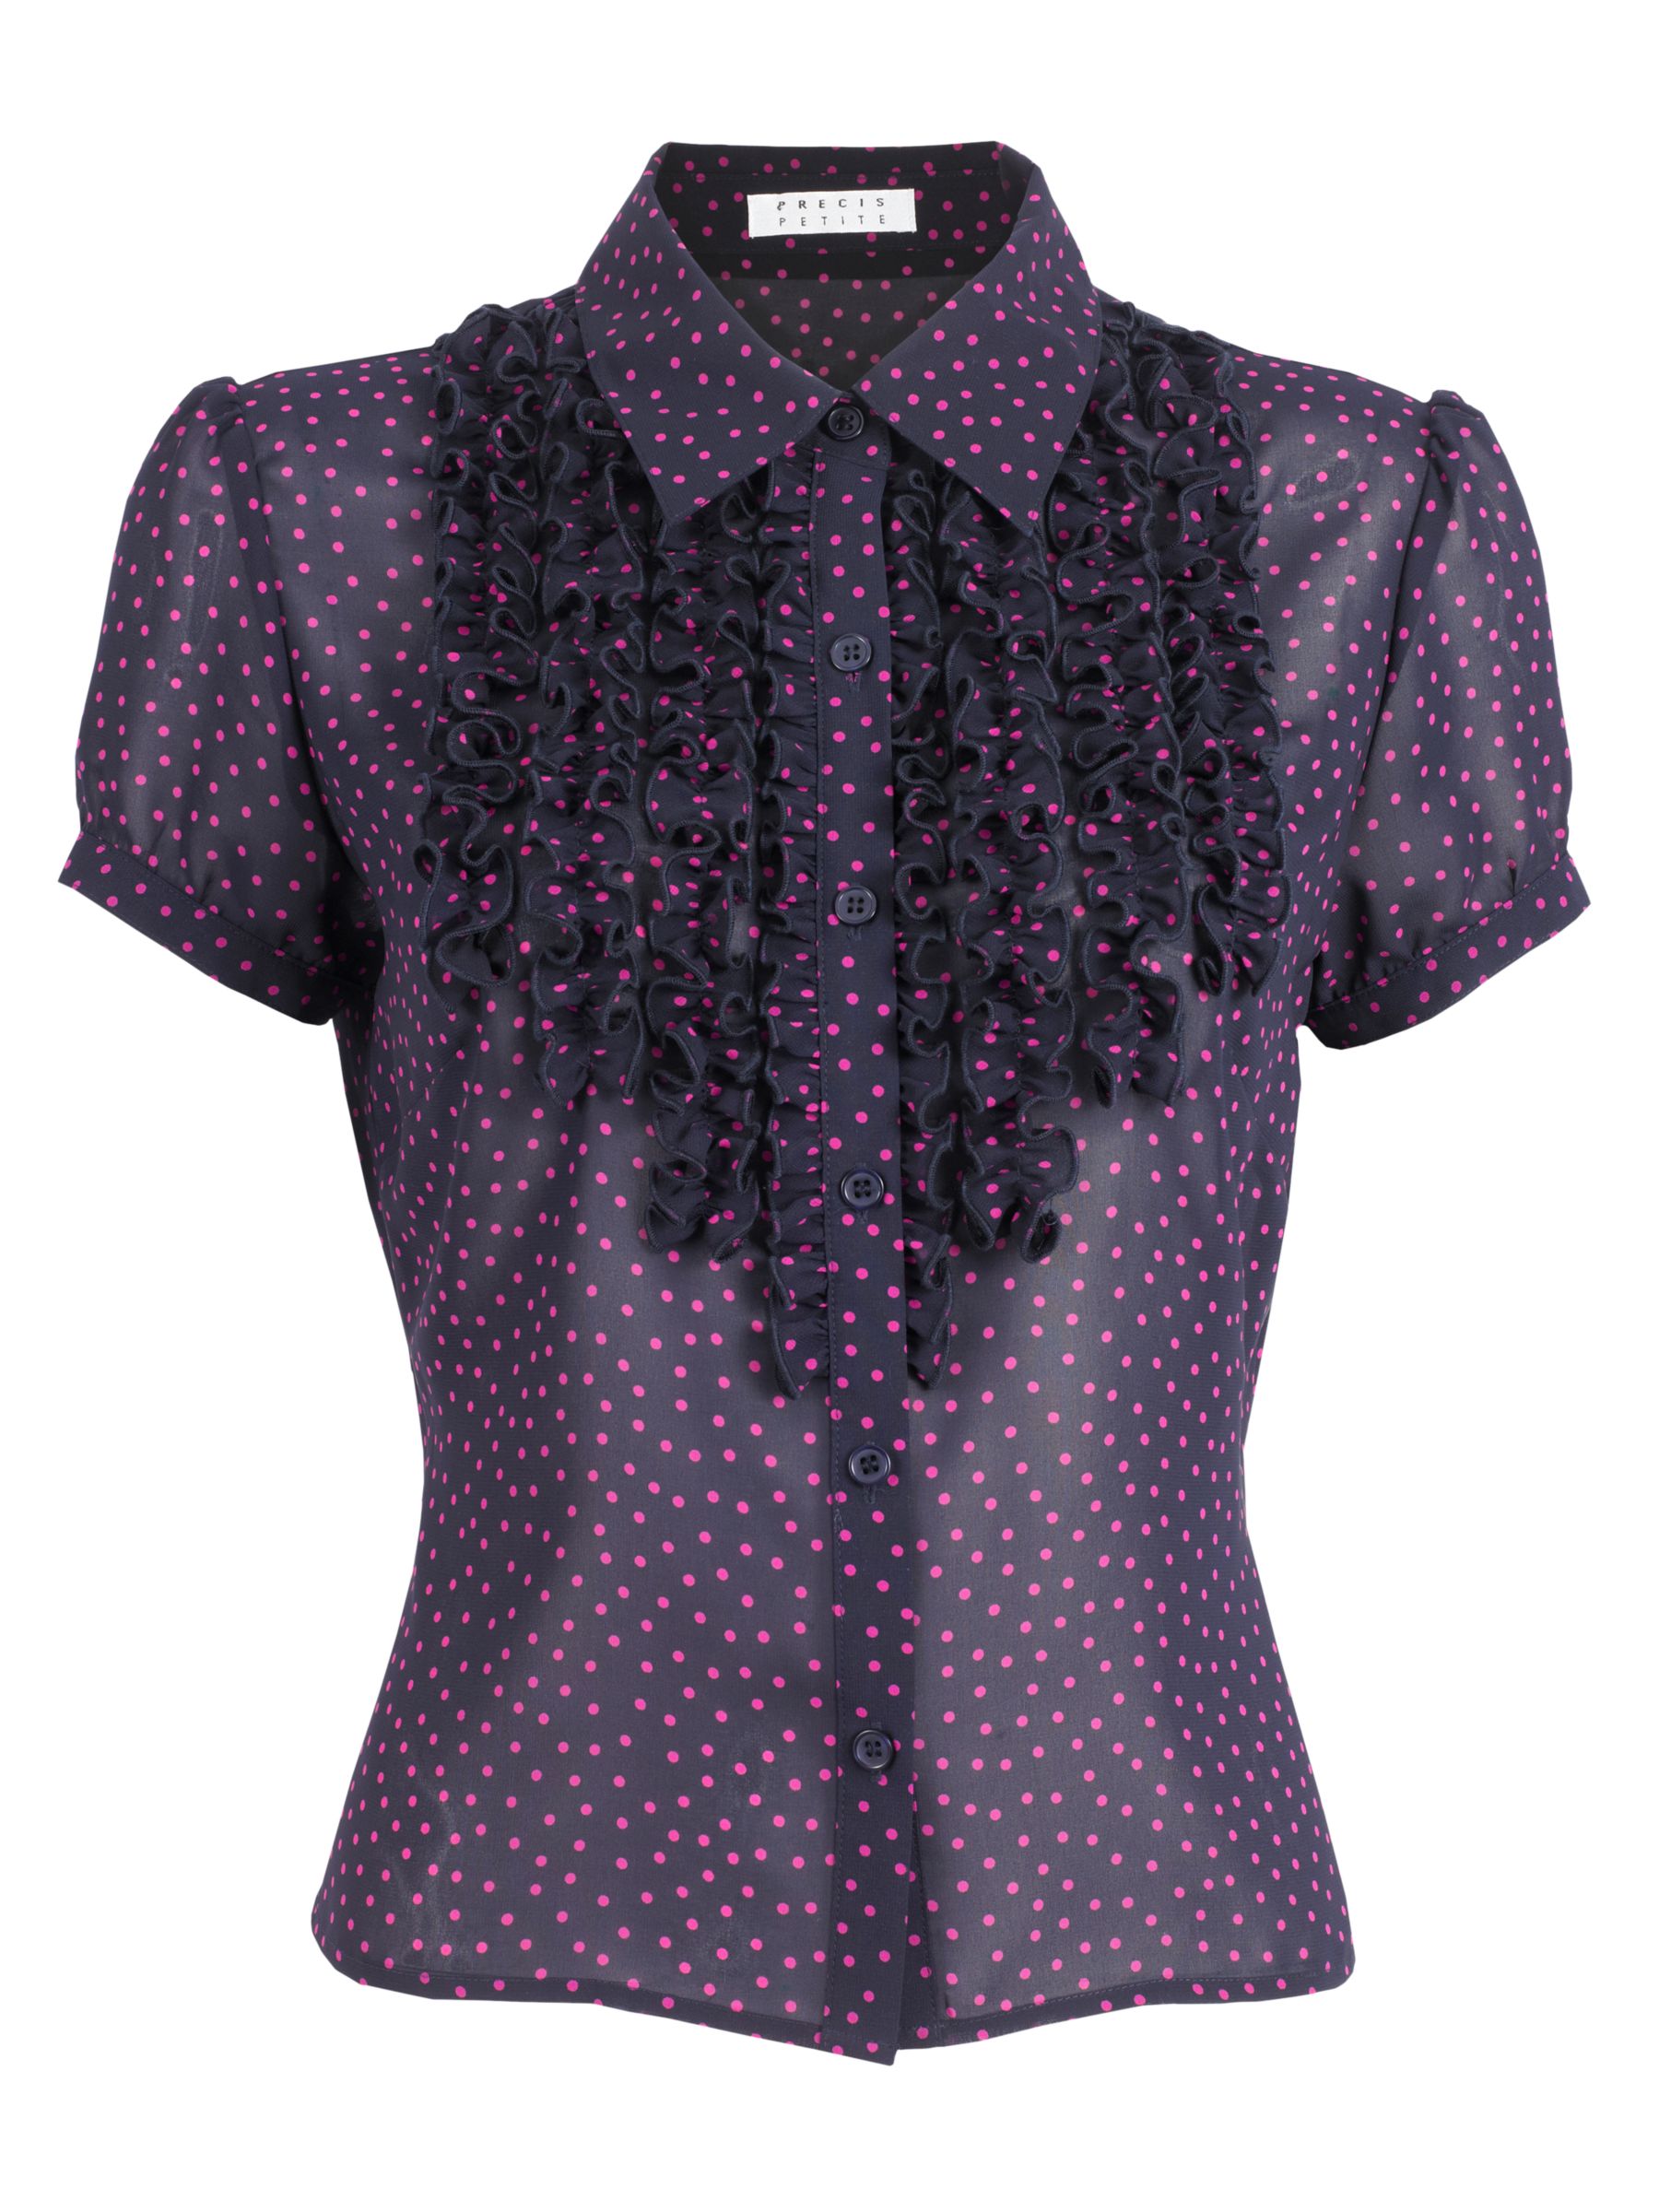 Precis Petite Frill Front Spotted Blouse,